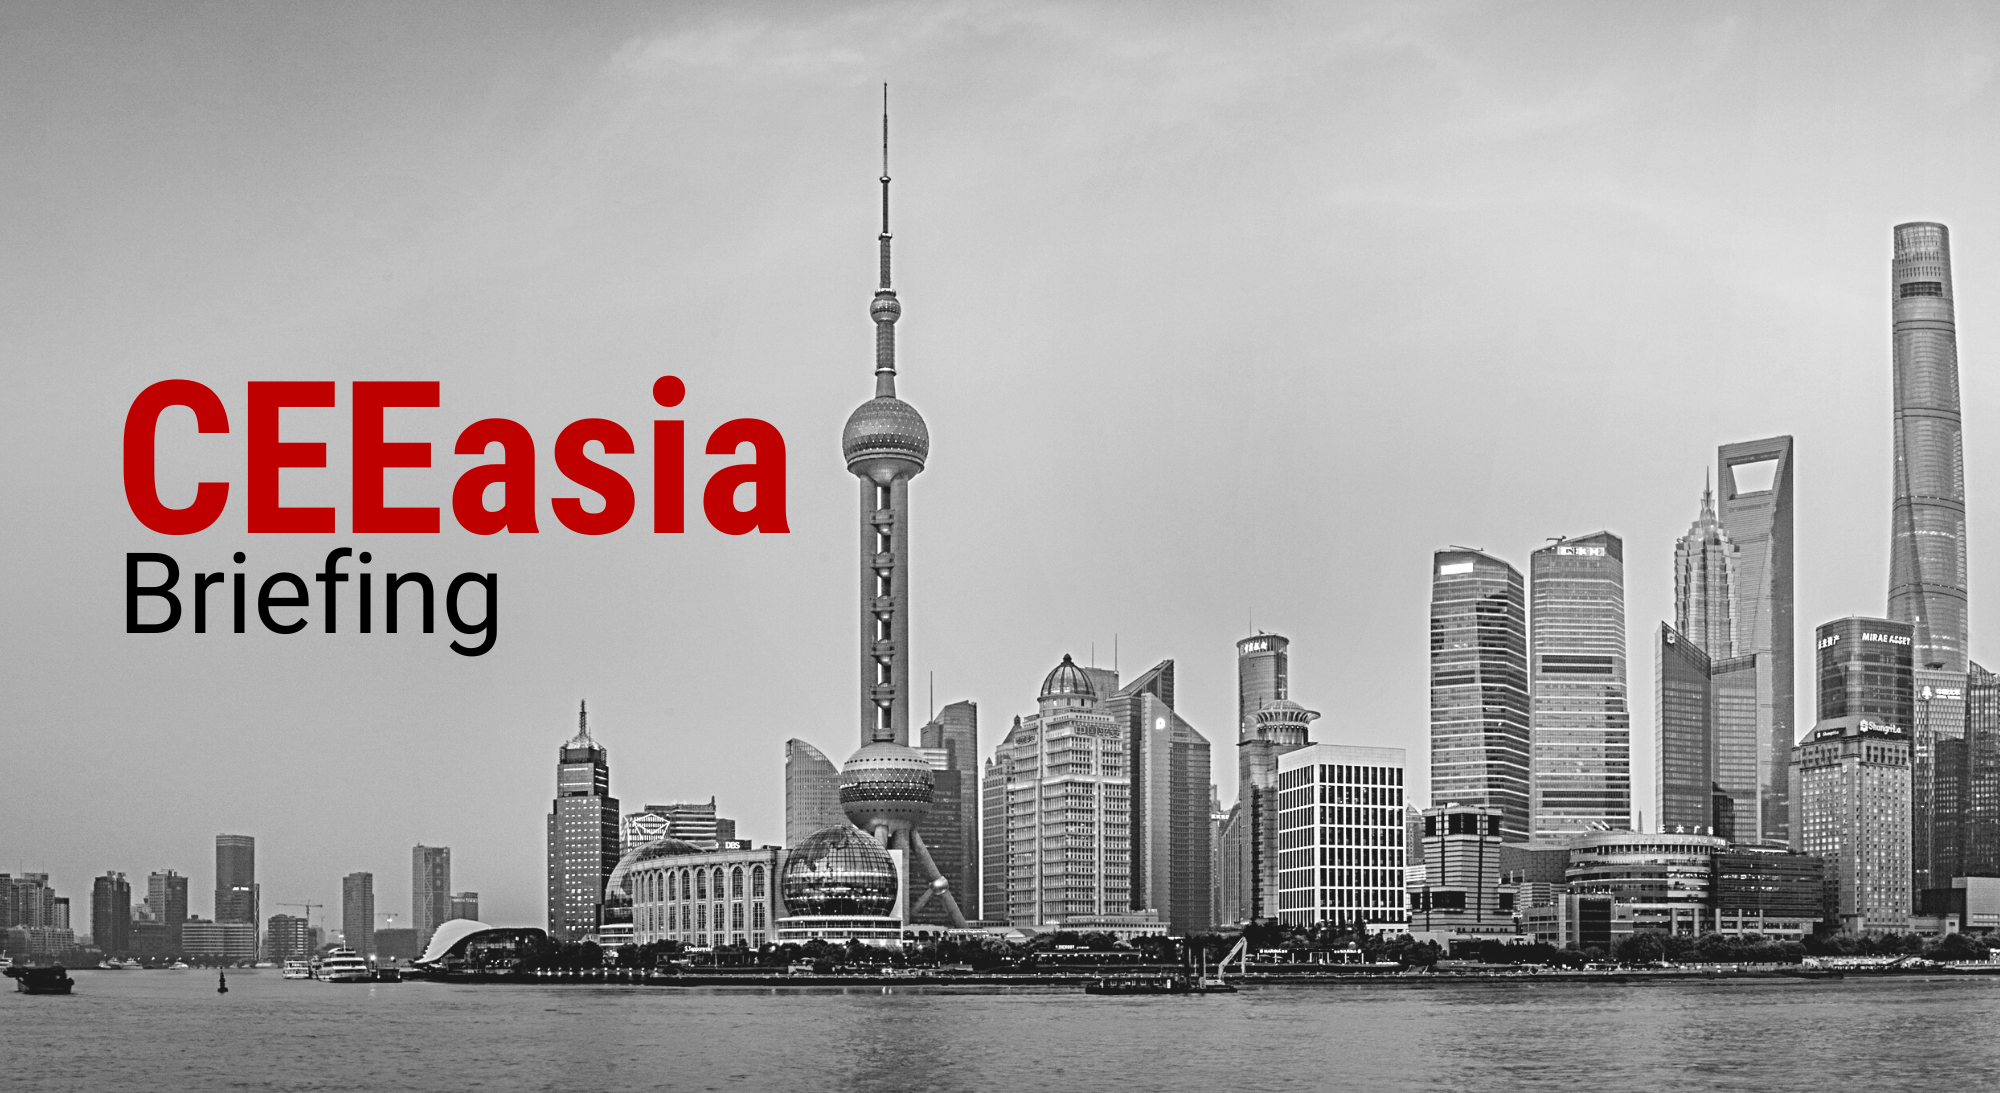 CEEasia Briefing #13: Criticism of CAI, Chinese request for an extradition of an activist, Delayed 17+1 summit, Slovakia and the democracies of North East Asia, 2021 EU-India Summit